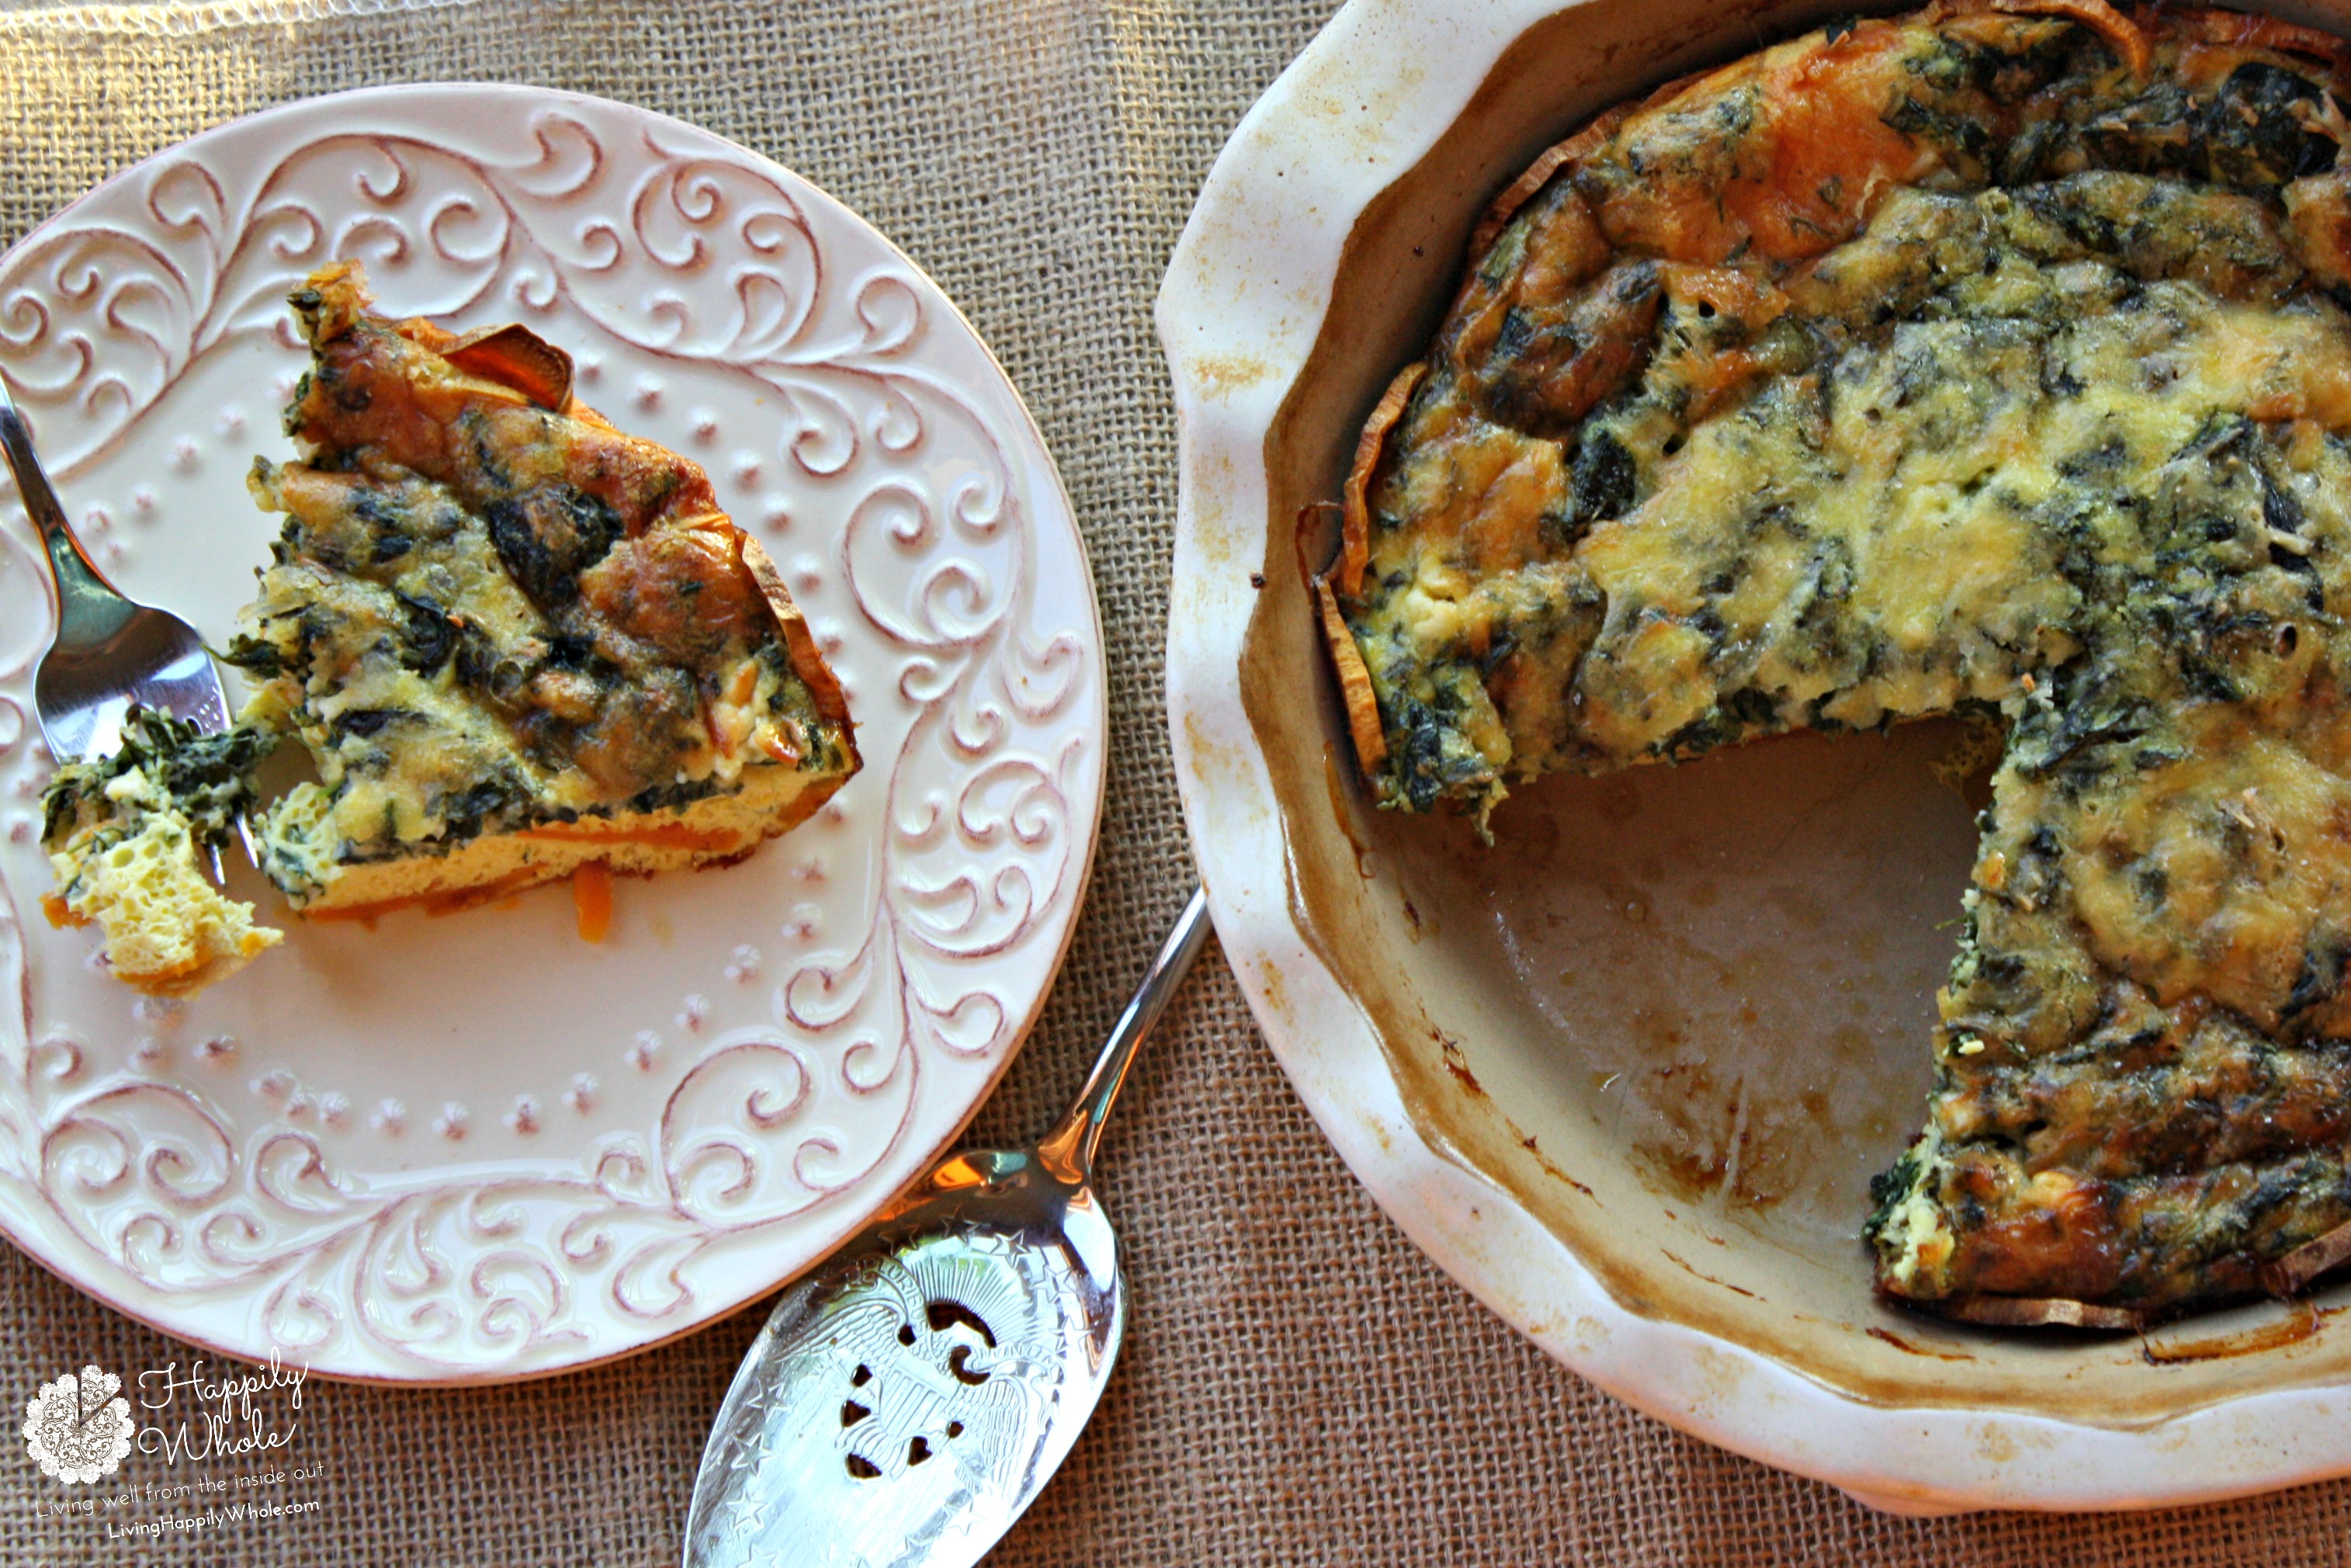 Sweet Potato Crustless Quiche with spinach, fresh herbs and cheese